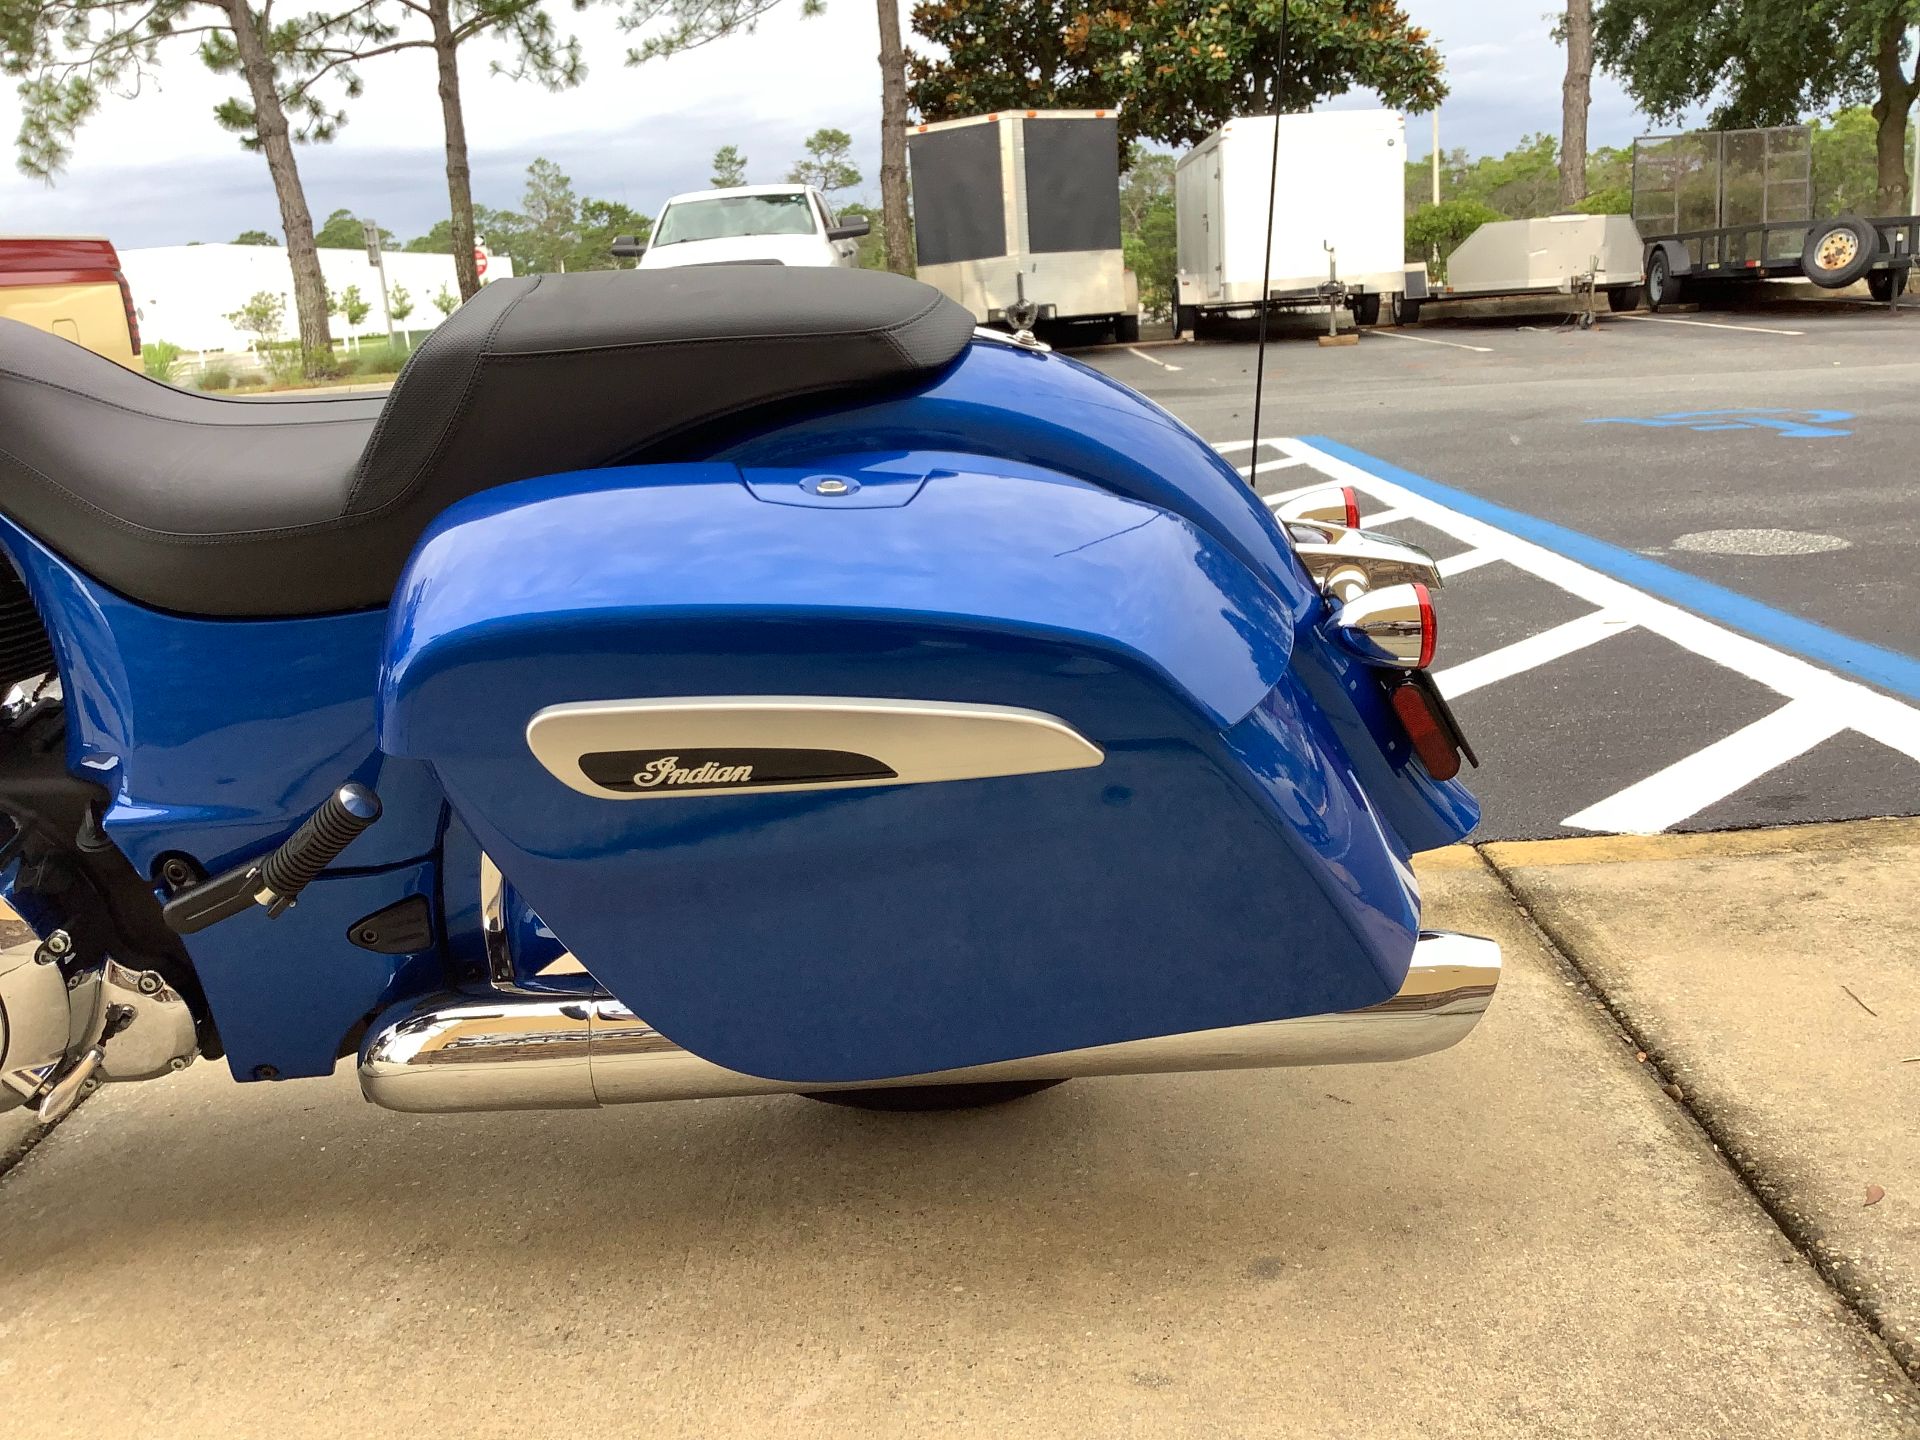 2020 Indian CHIEFTAIN LIMITED in Panama City Beach, Florida - Photo 9